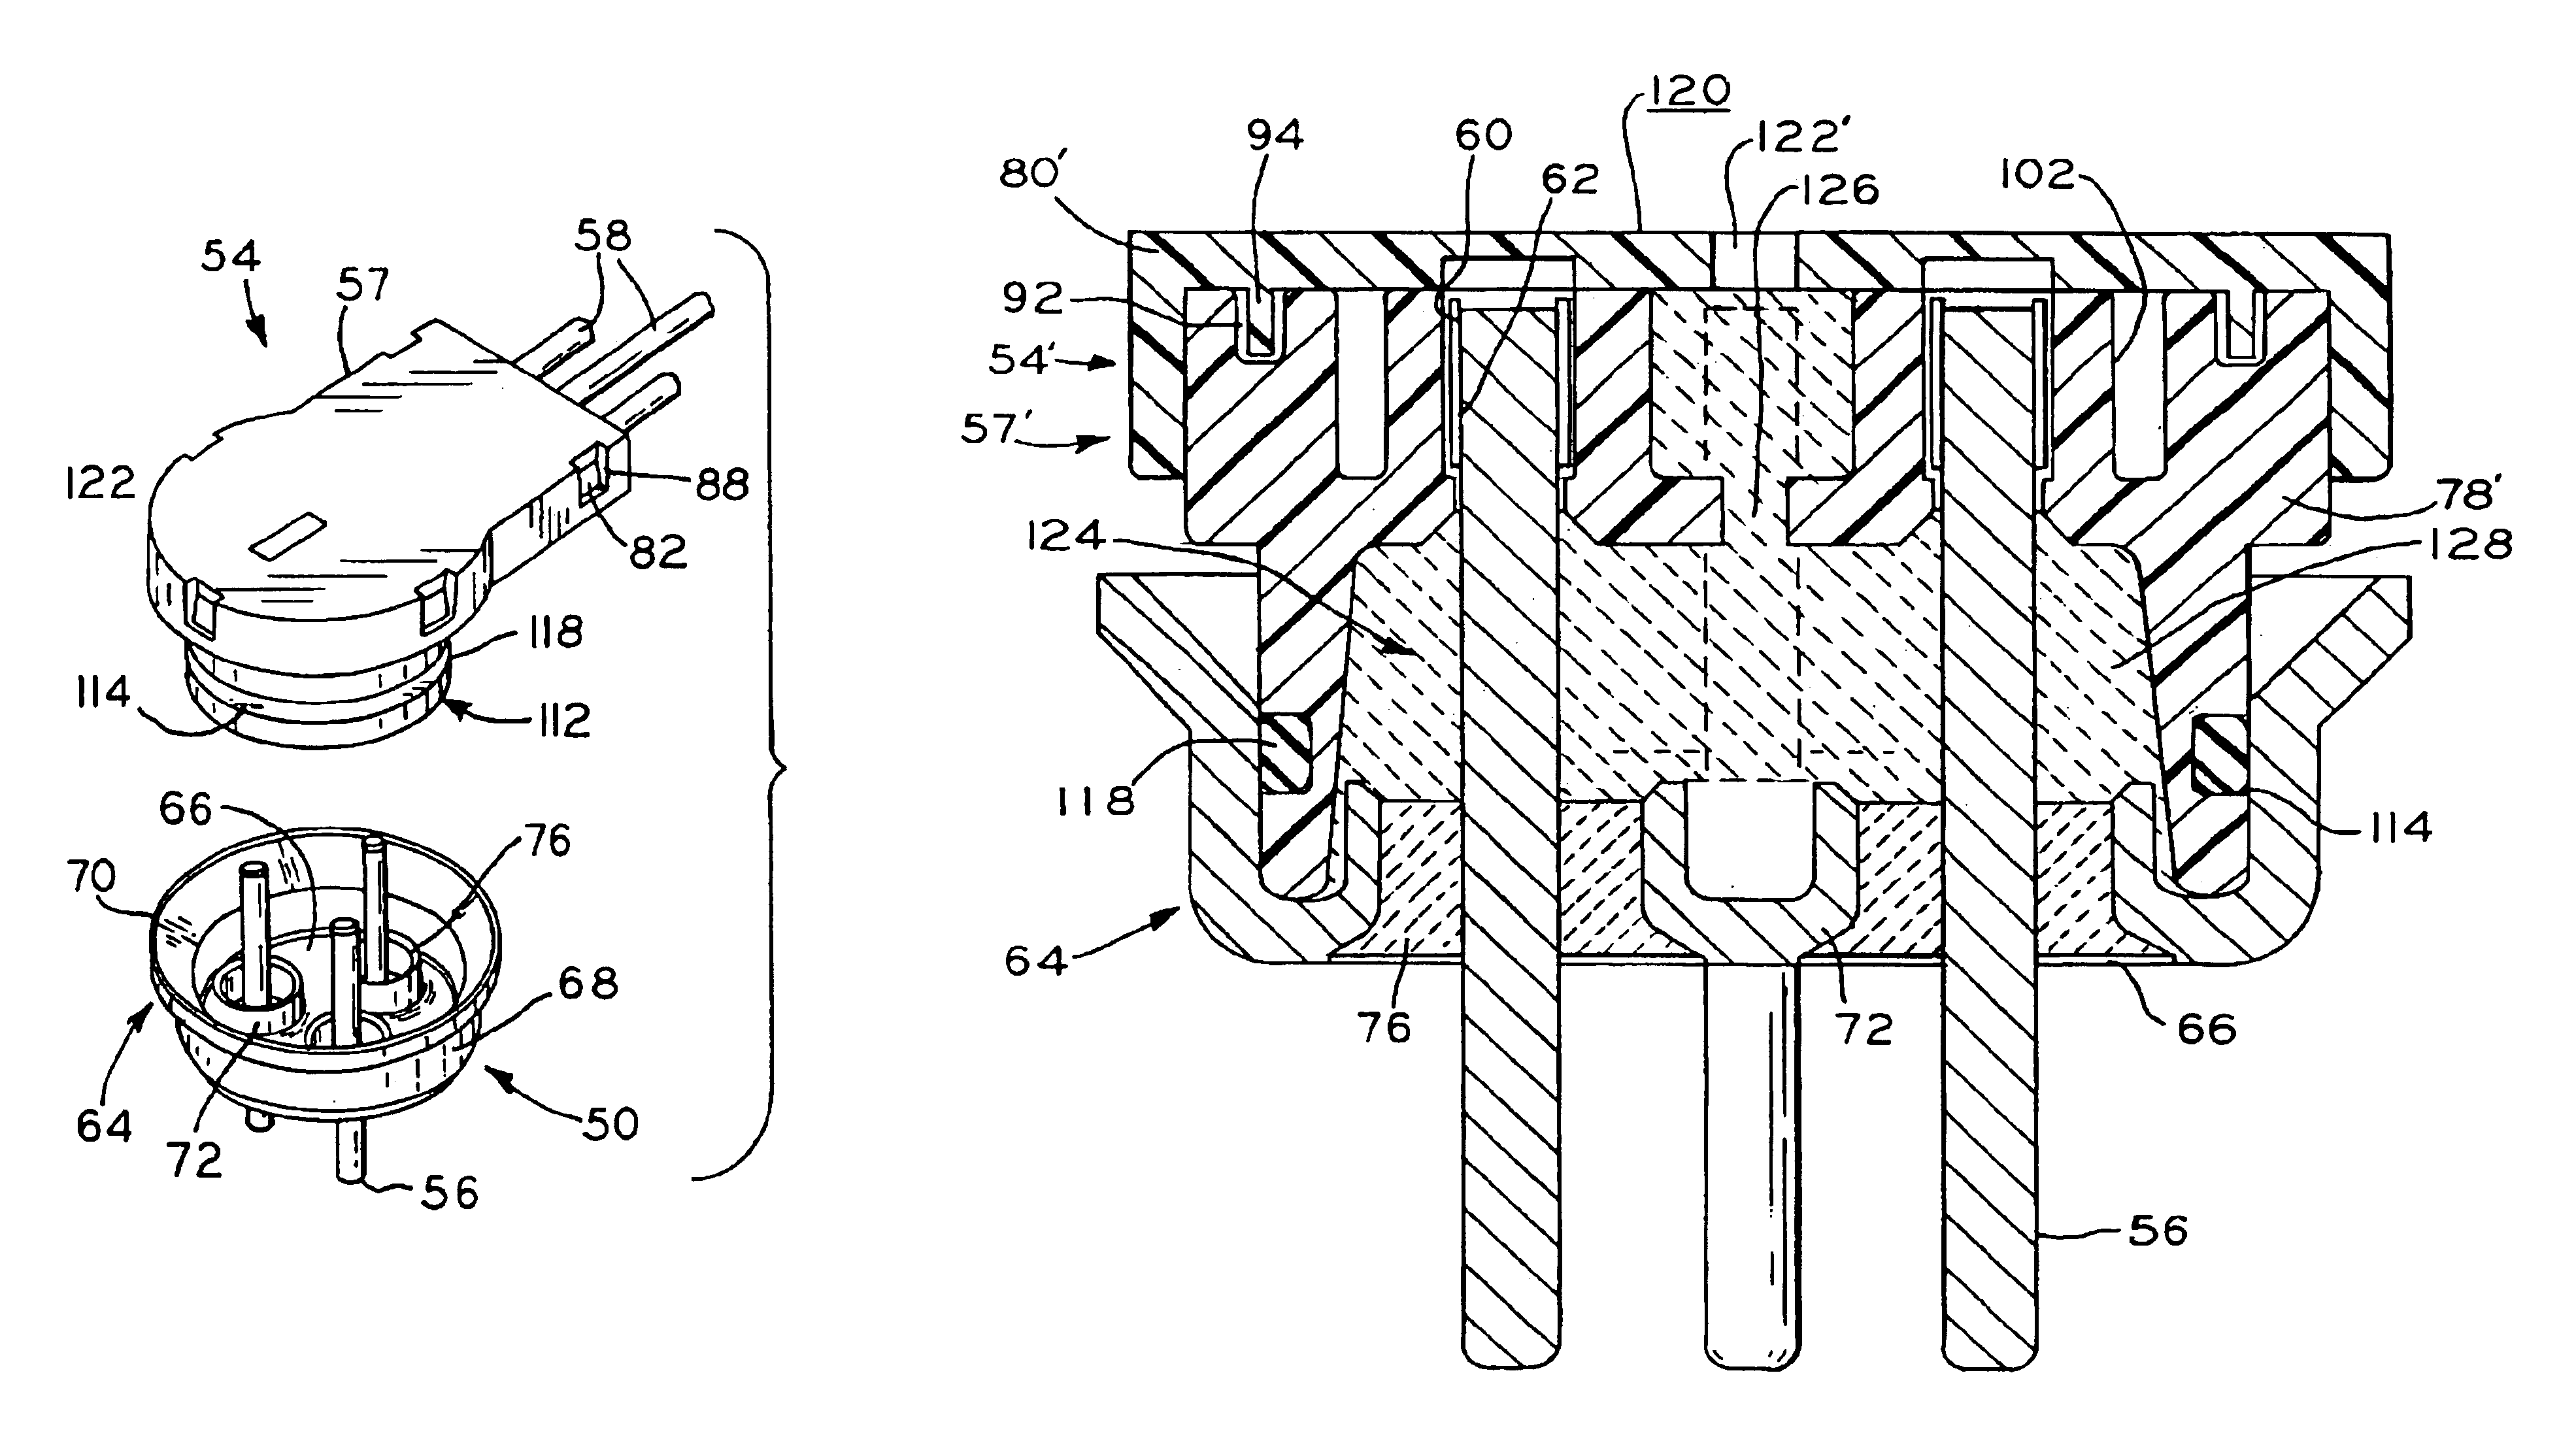 Compressor with terminal assembly having dielectric material